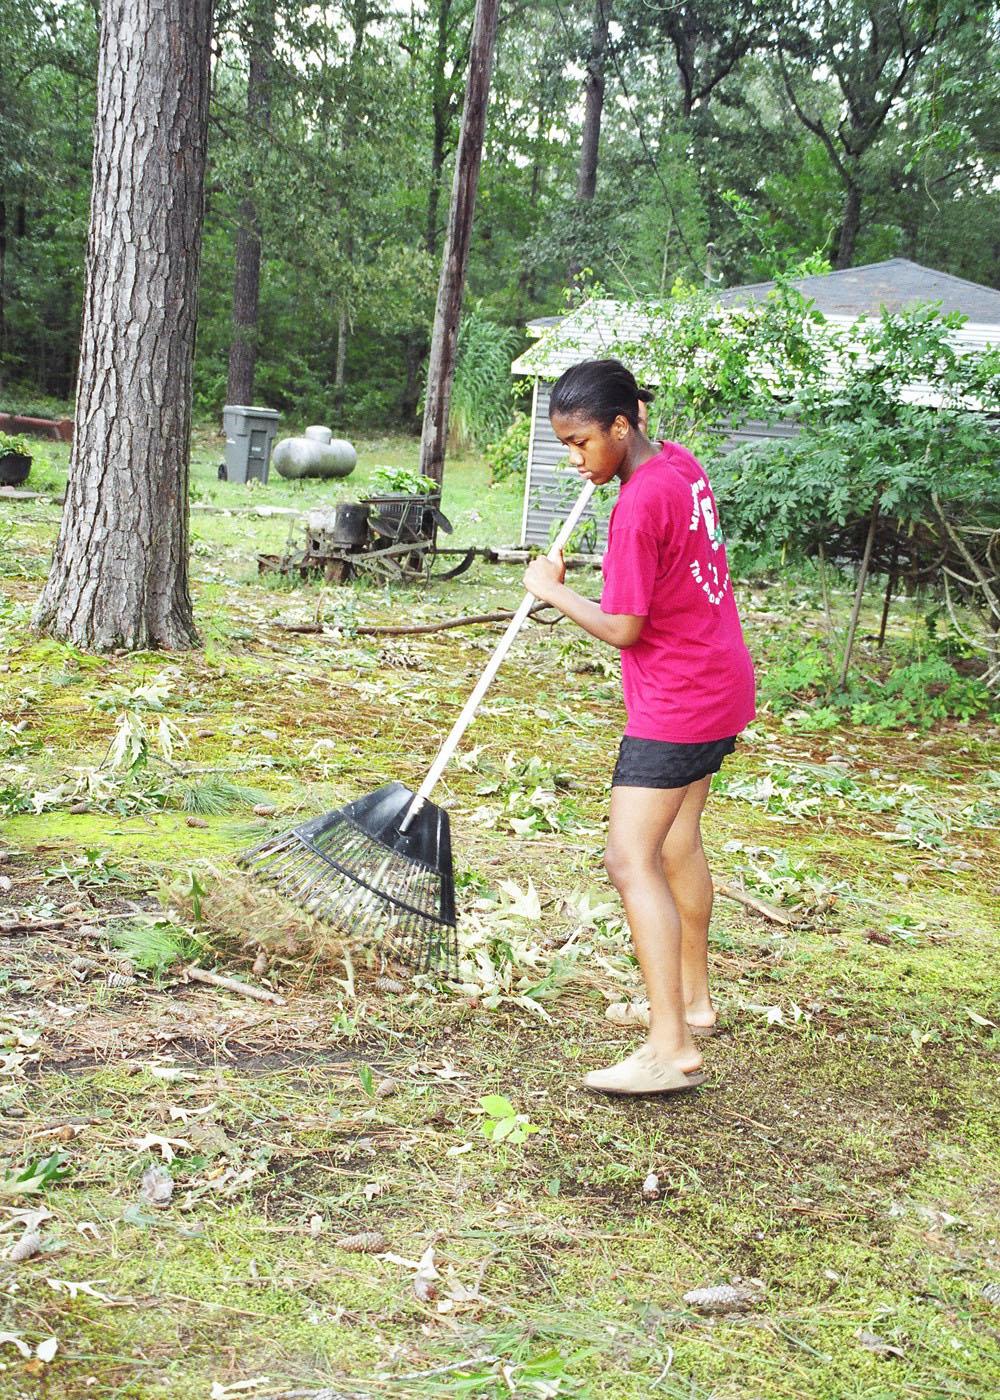 Andrea Brown, a 14-year-old Oktibbeha County 4-H member, rakes limbs and debris in the yard of a senior adult friend in the Bell Schoolhouse Community. Many Mississippians are depending on the help of friends and family to assist in cleaning up in the wake of Hurricane Katrina.